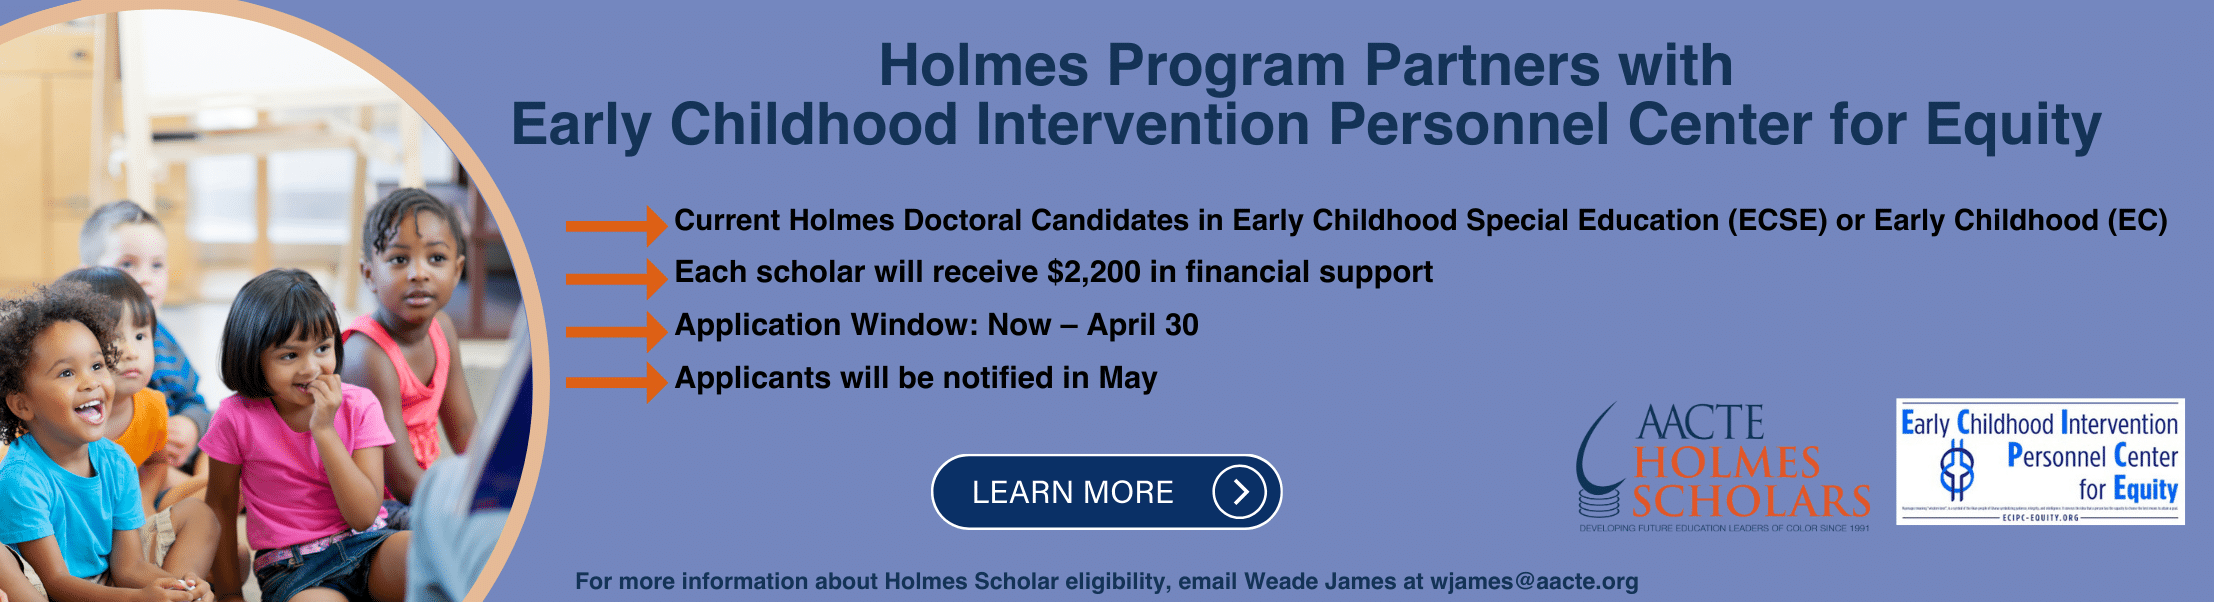 Picture of Toddlers smiling on the left. 
Holmes Program Partners with Early Childhood Intervention Personnel Center for Equity link to application
Current Holmes Doctoral Candidates in ECSE or EC
Each scholar will receive $2200.00 in financial support
Applications open until April 30, 2024
Applicants will be notified in May